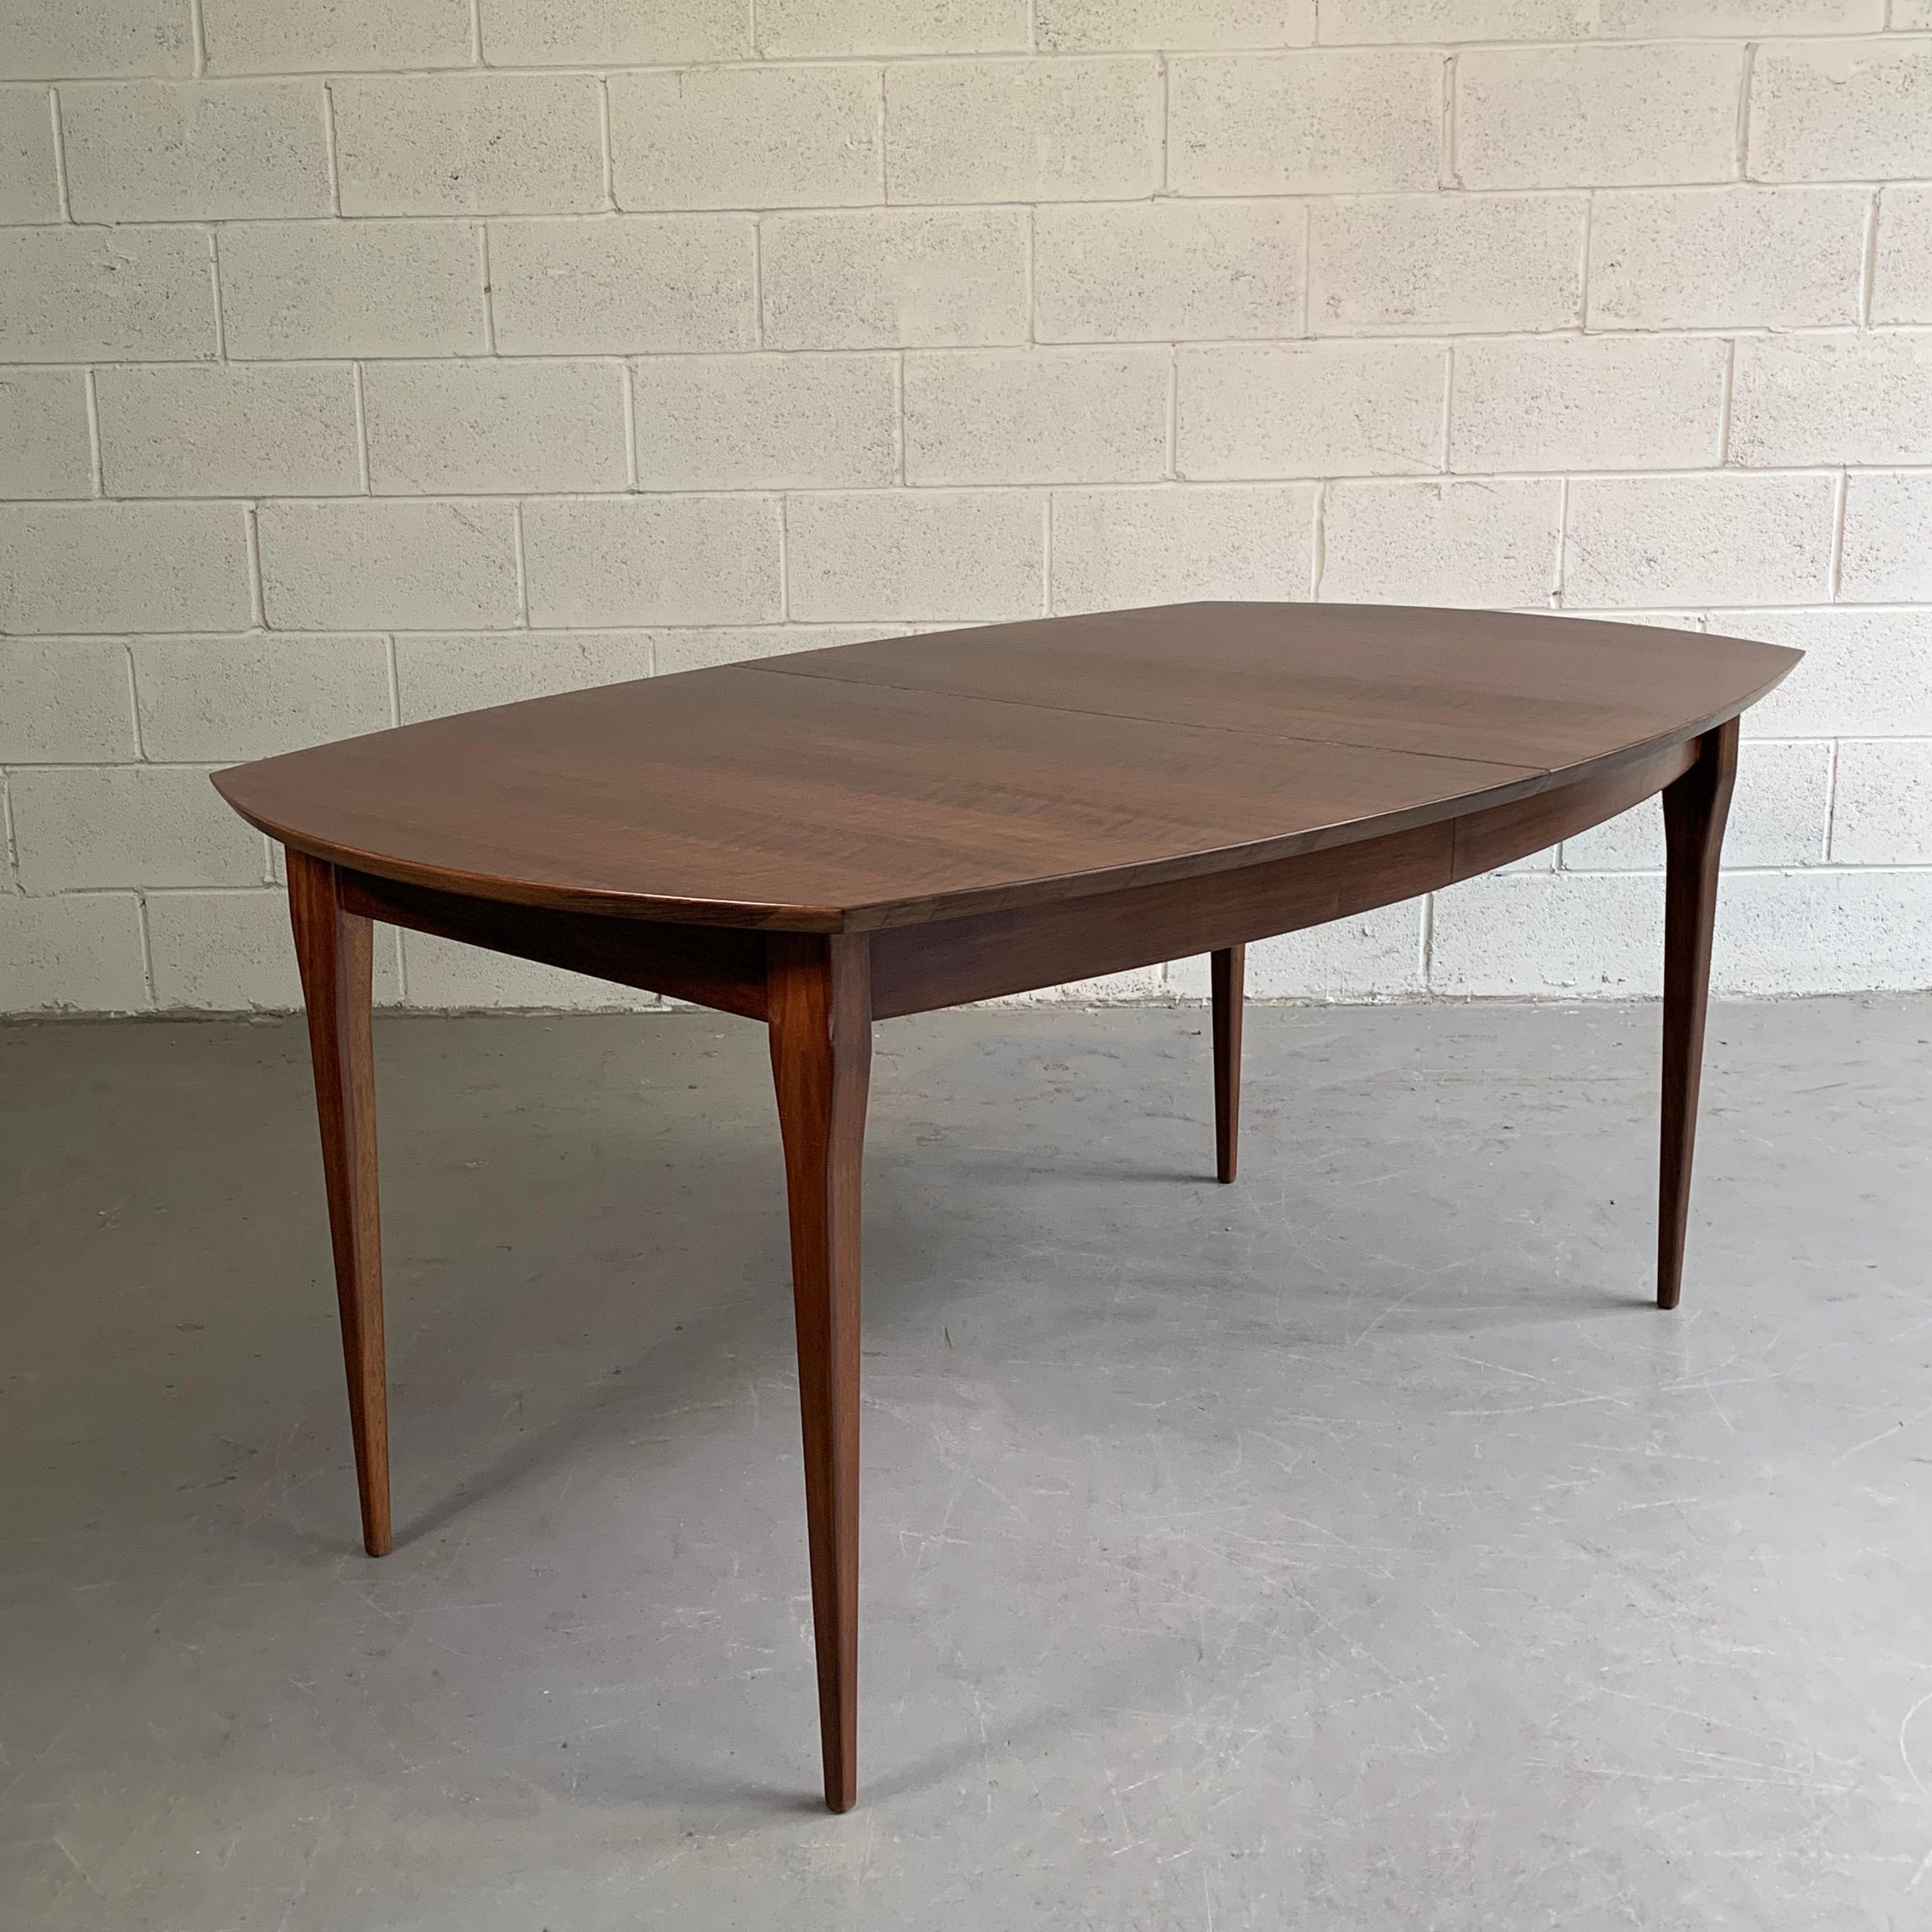 Beautifully detailed, Mid-Century Modern, walnut, extension dining table by Bertha Schaefer for M. Singer & Sons includes three, 16 inch leaves extending the table to 80 - 96 - 112 to accommodate up to 12 people.